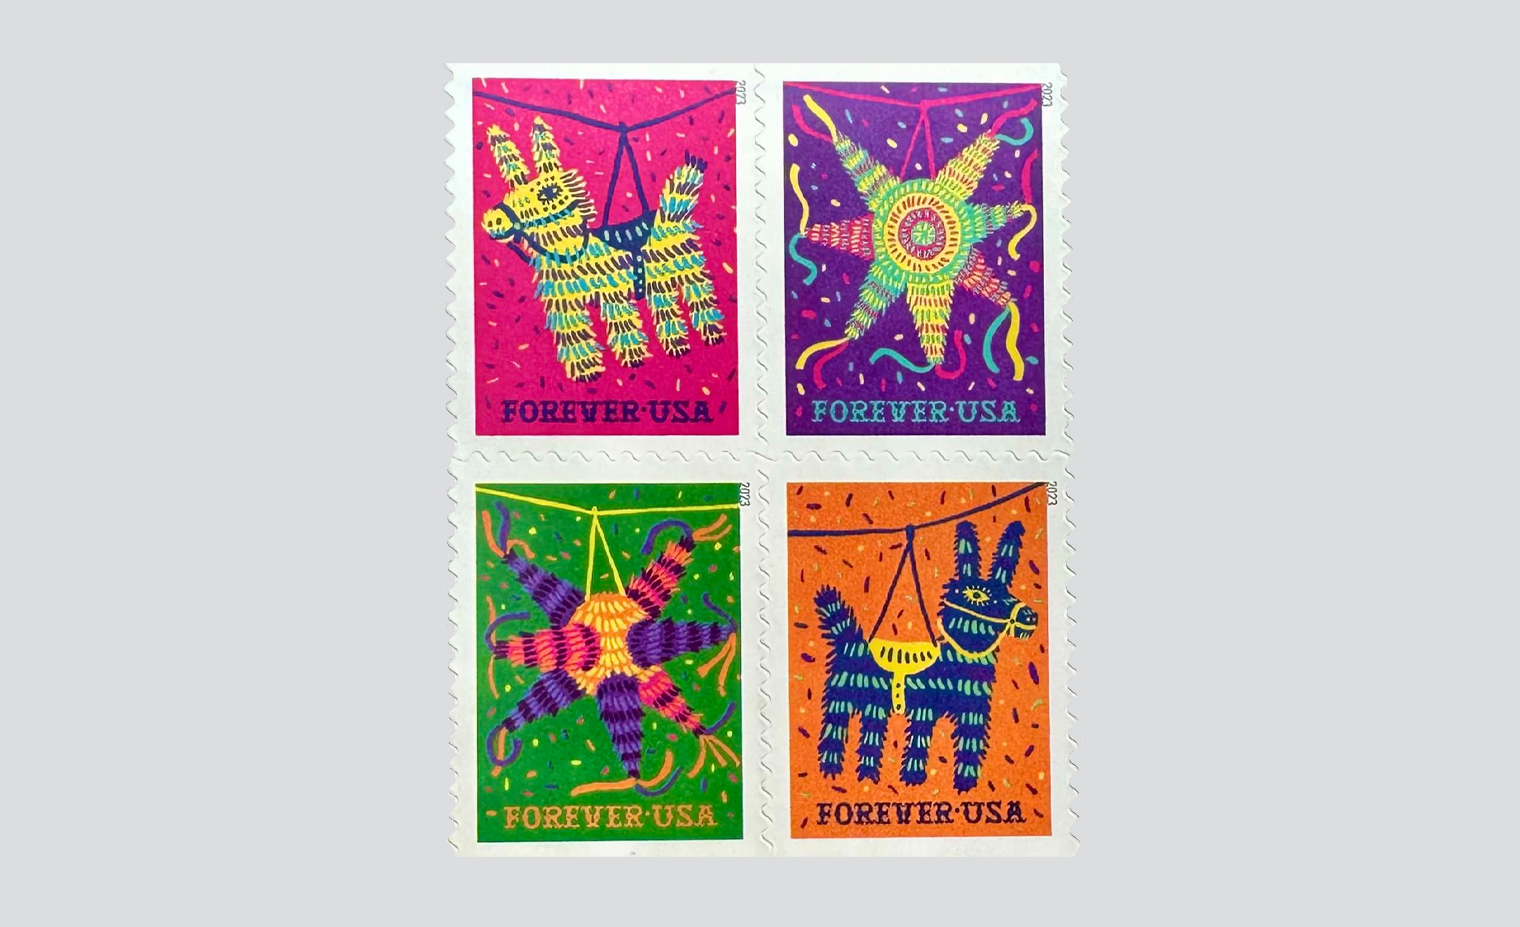 The stamp art features four digital illustrations of two traditional piñata designs — a donkey and a seven-pointed star. The bright, saturated color palette was inspired by Mexican culture, including the vibrant colors of small-town houses, traditional hand-sewn dresses, handmade toys and flowers, and classic piñatas themselves. The donkey illustrations are set against either a pink or orange background; the stars feature either a purple or green background. The background colors add to the exuberant and celebratory feel of the stamps.